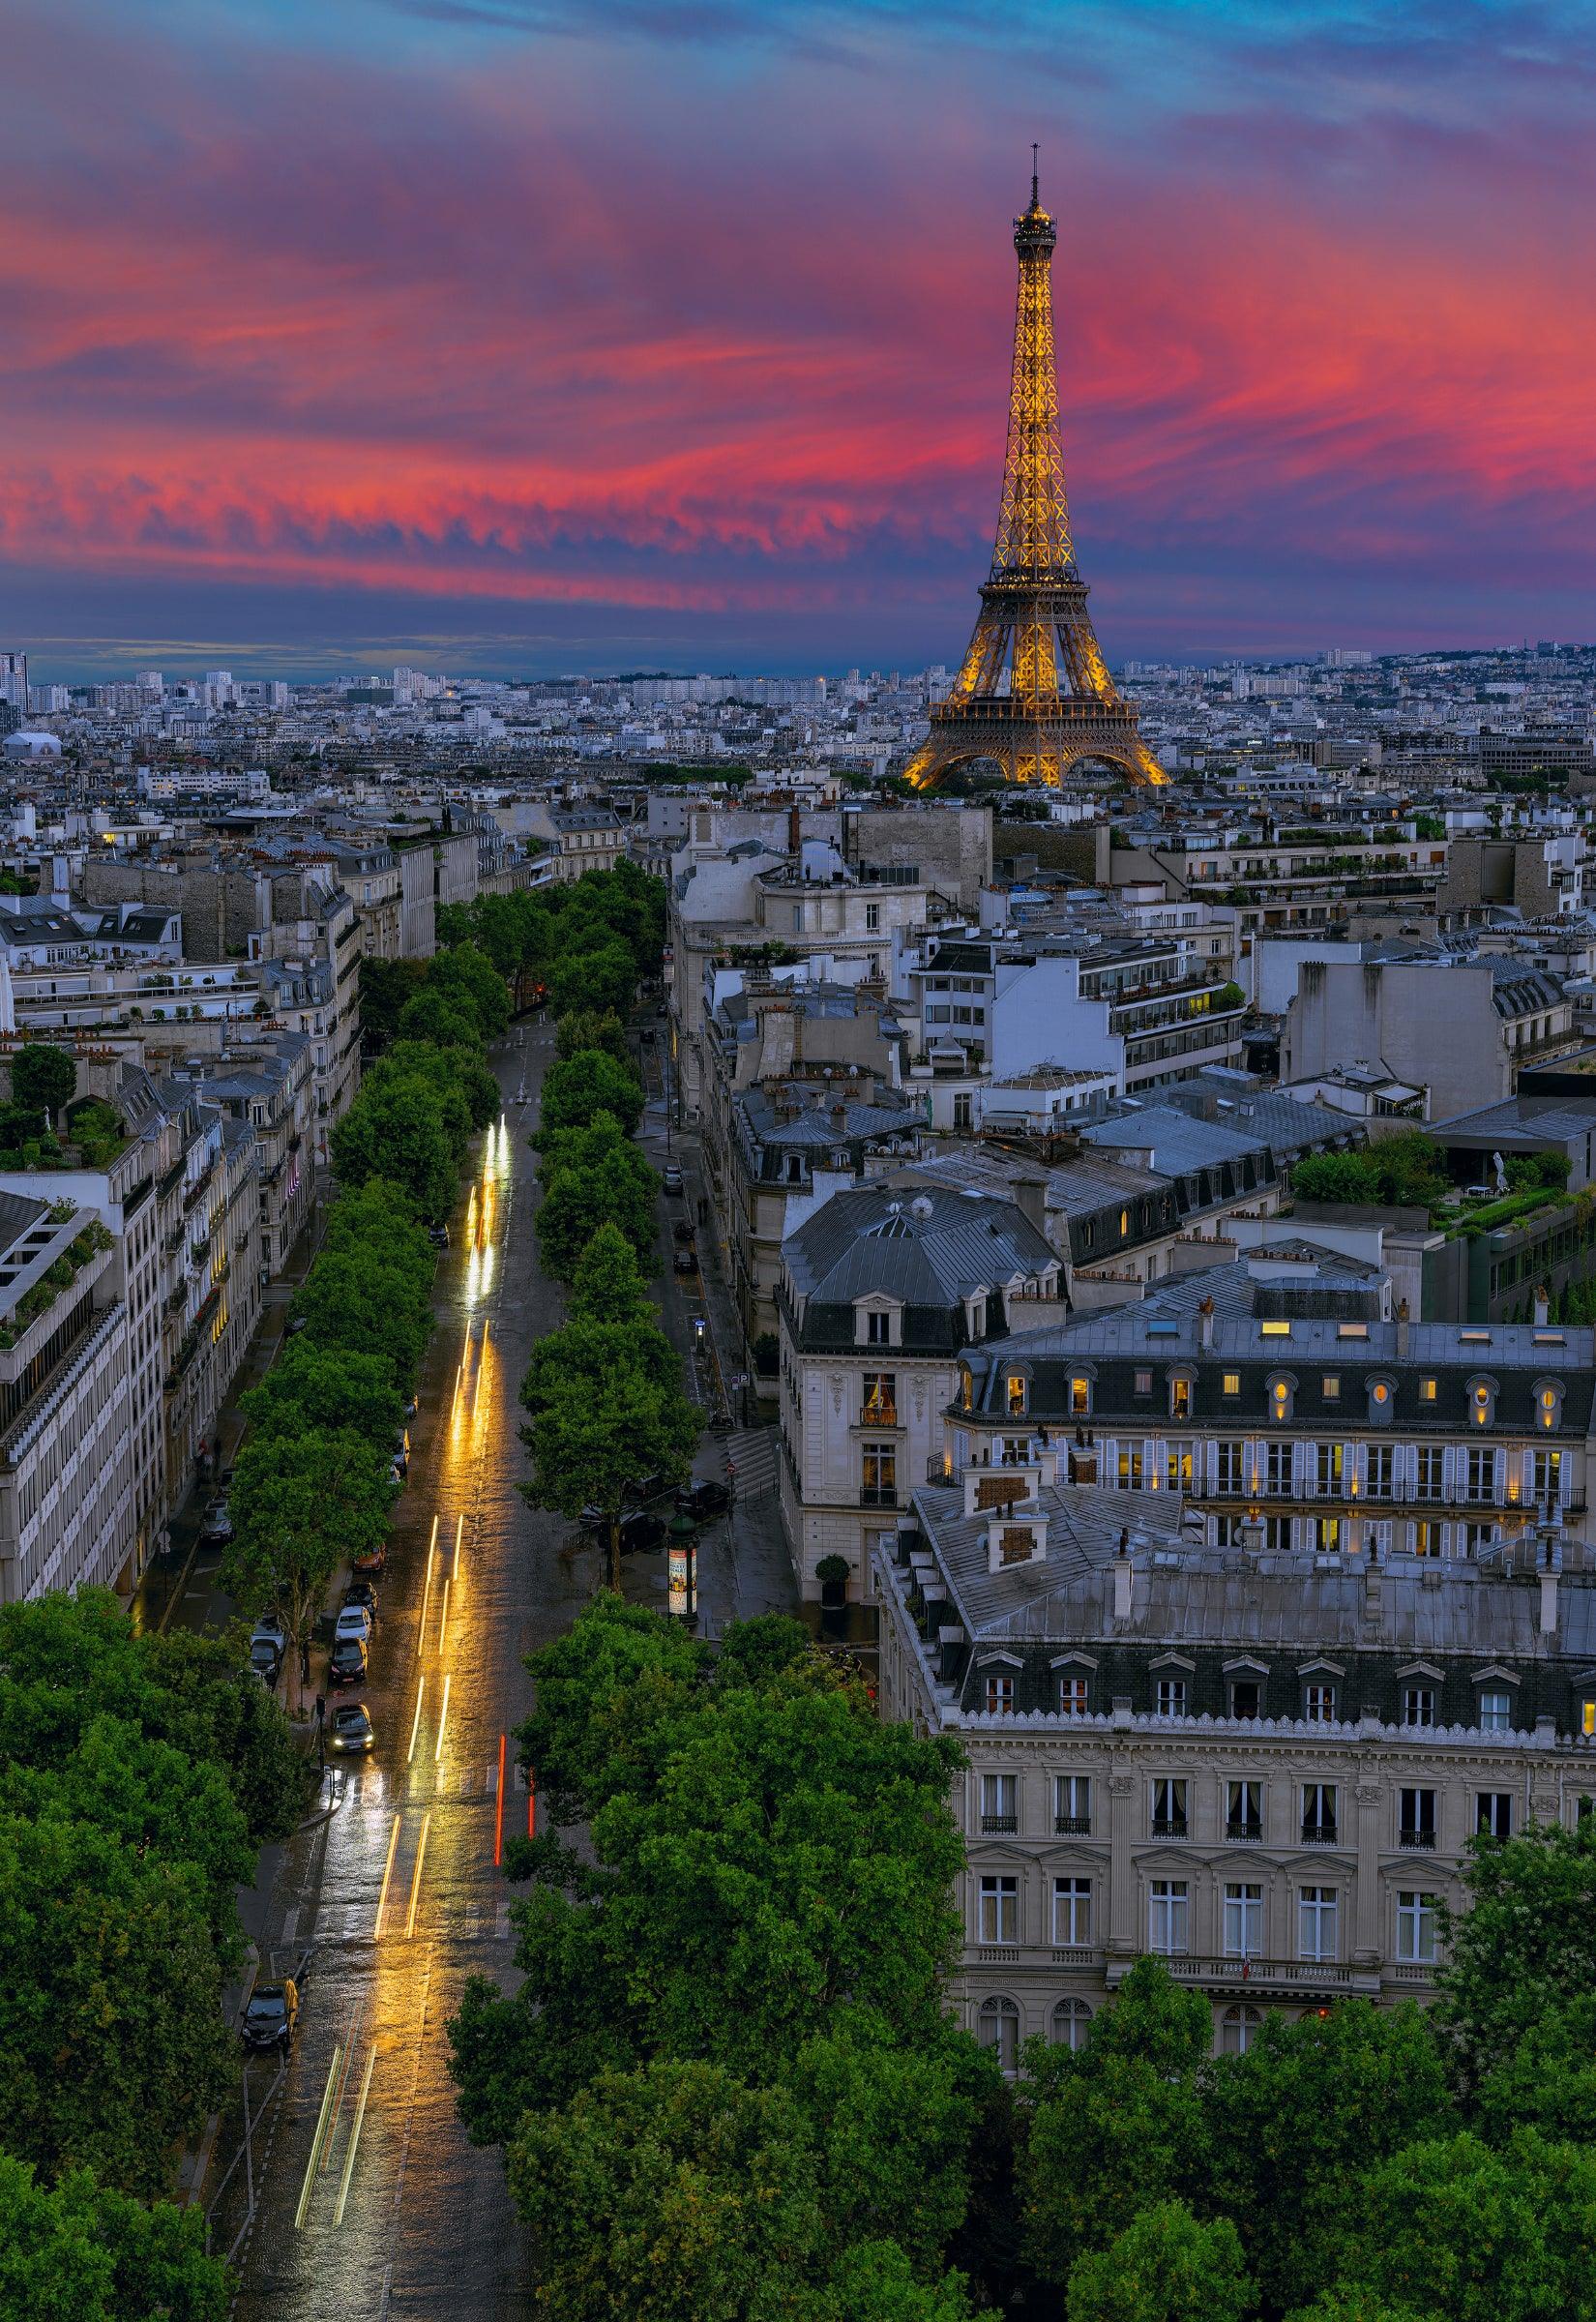 Rooftop view of the streets of Paris France and the Eiffel Tower lit up at sunset